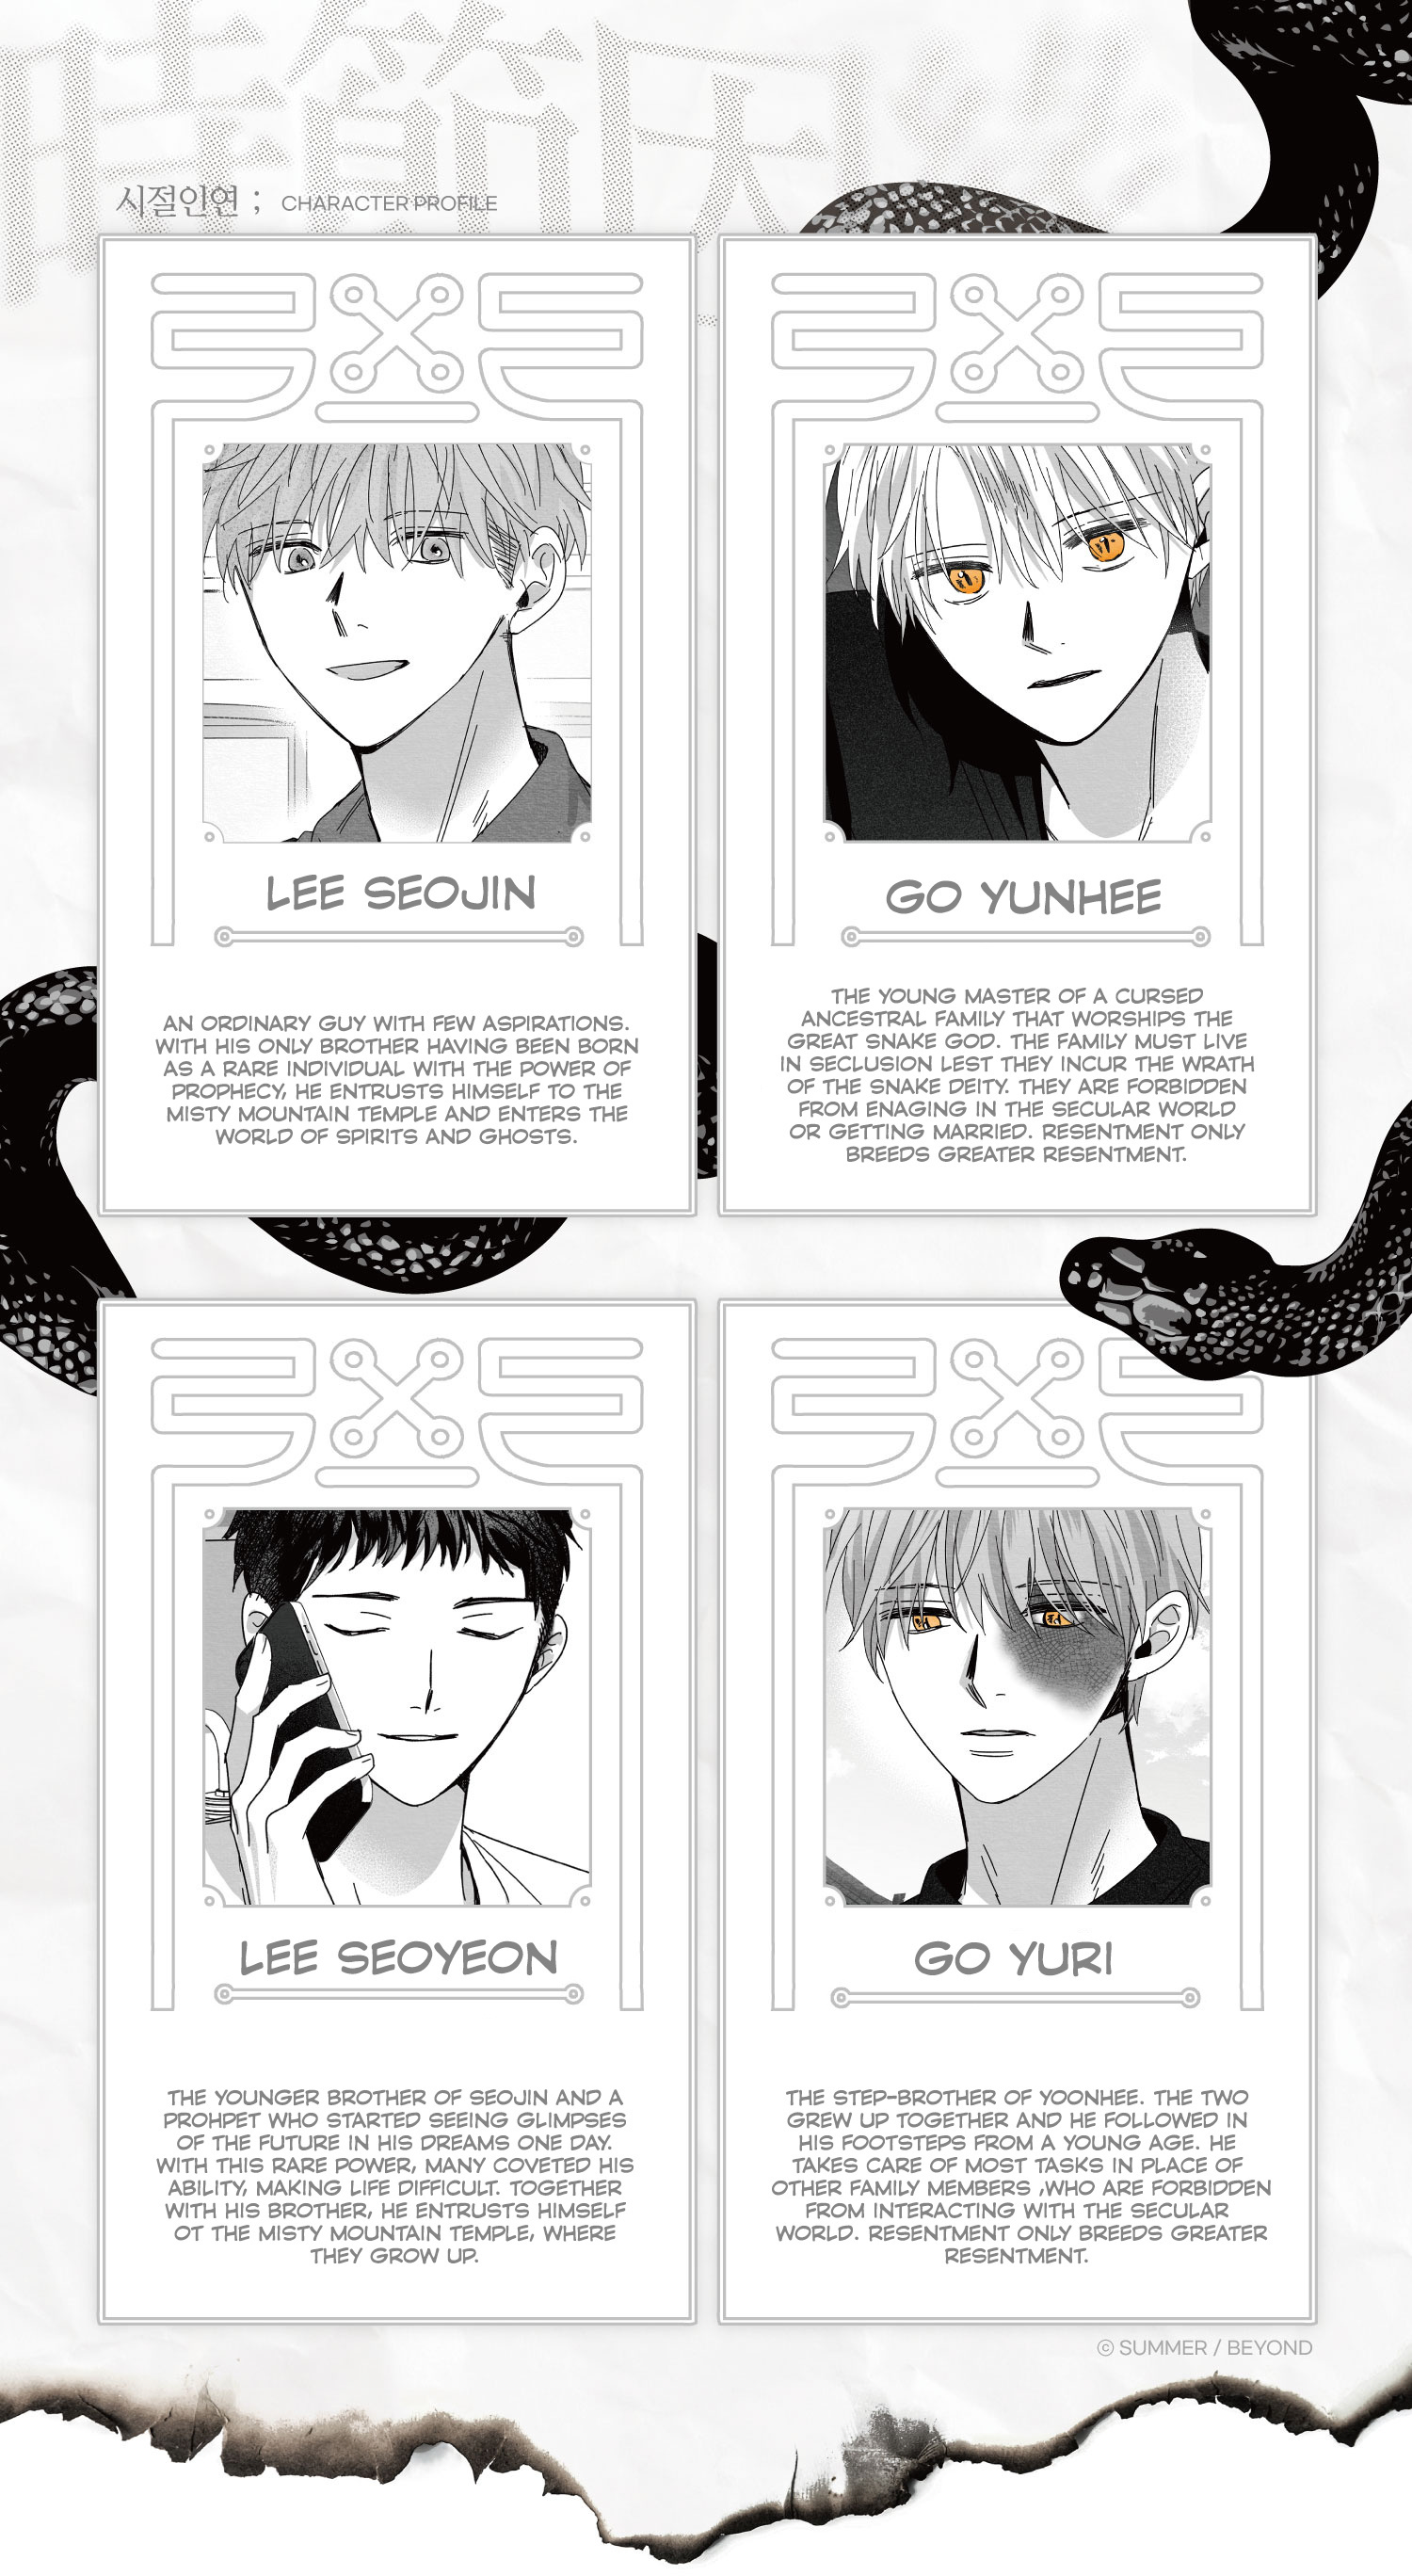 When We Acquainted Chapter 0: Character Profiles - Picture 2